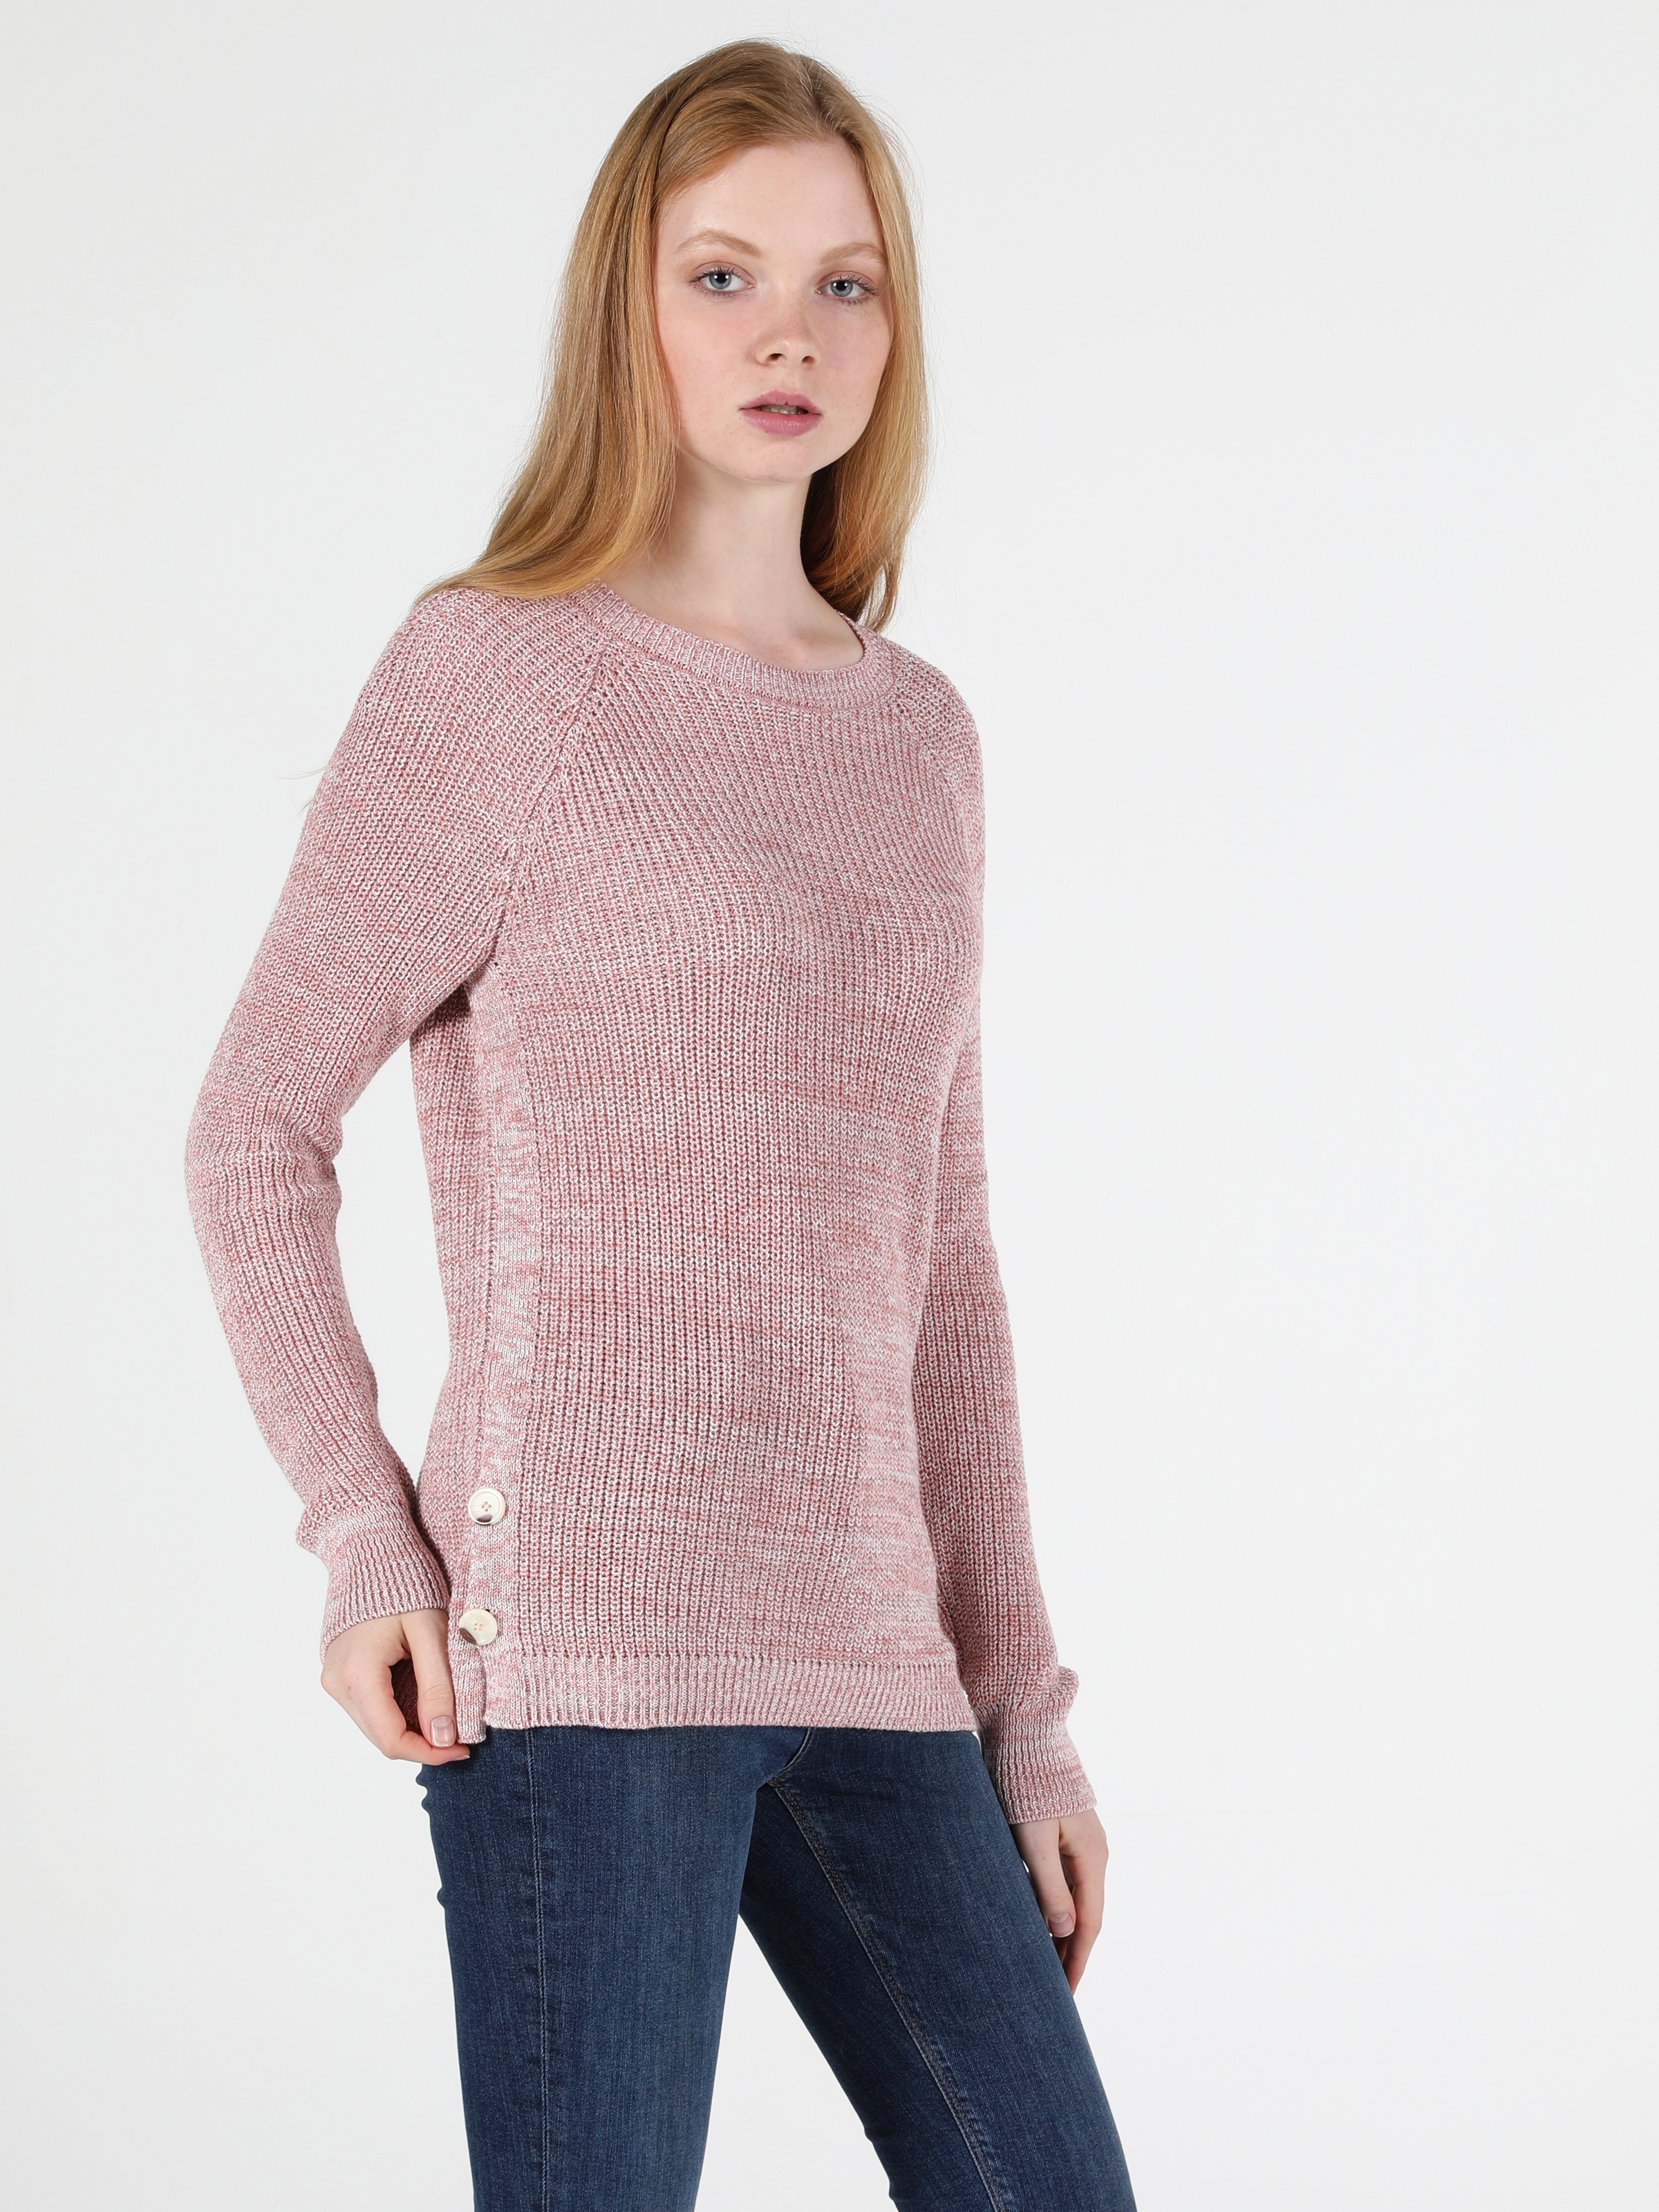 Colins Pınk Woman Sweaters. 3